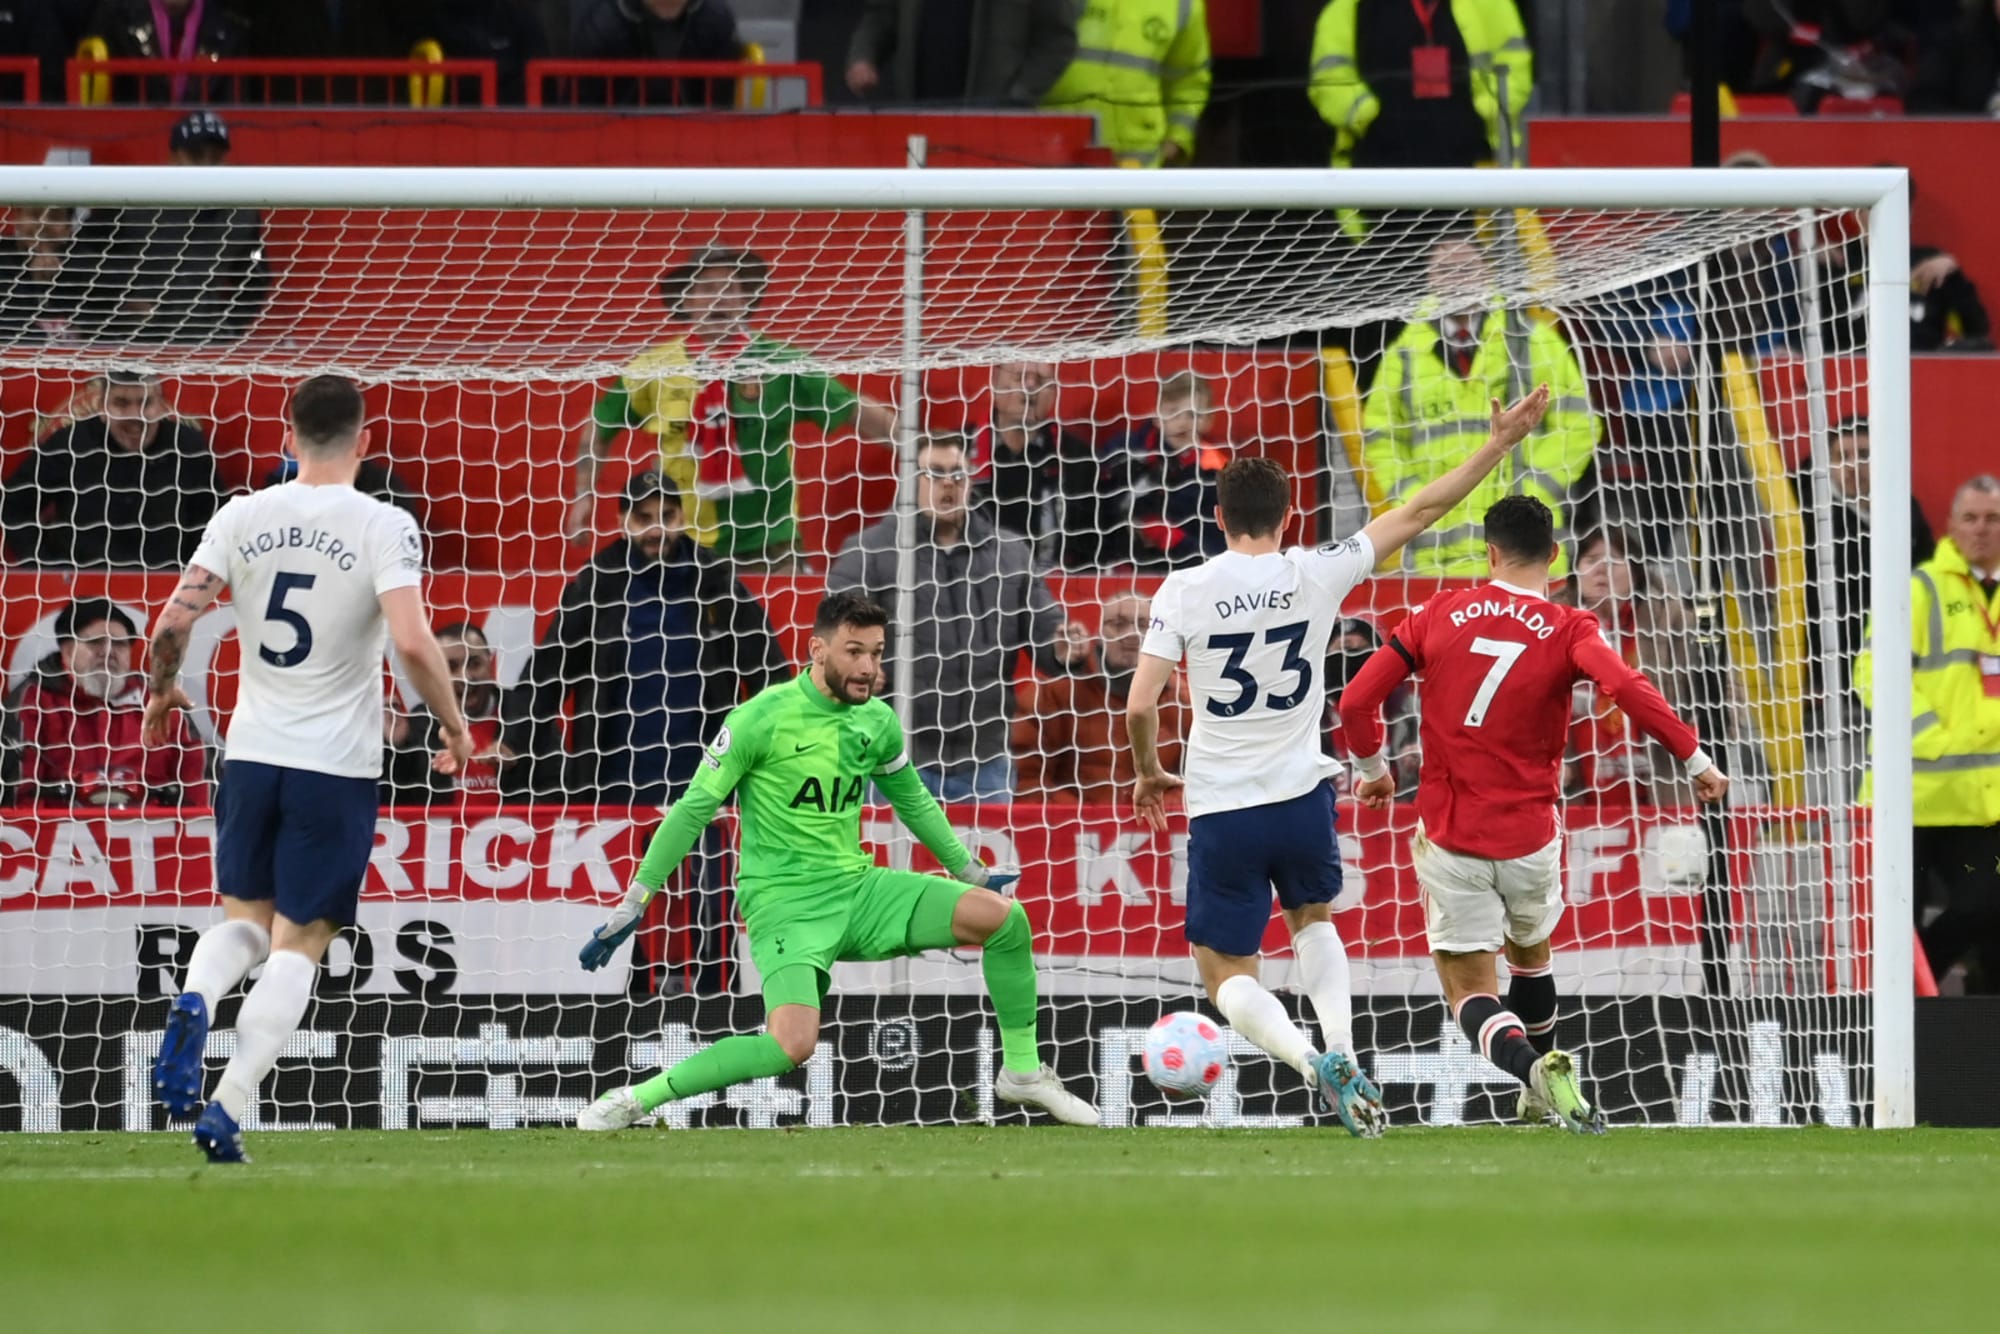 What to look for when Tottenham travels to Manchester United